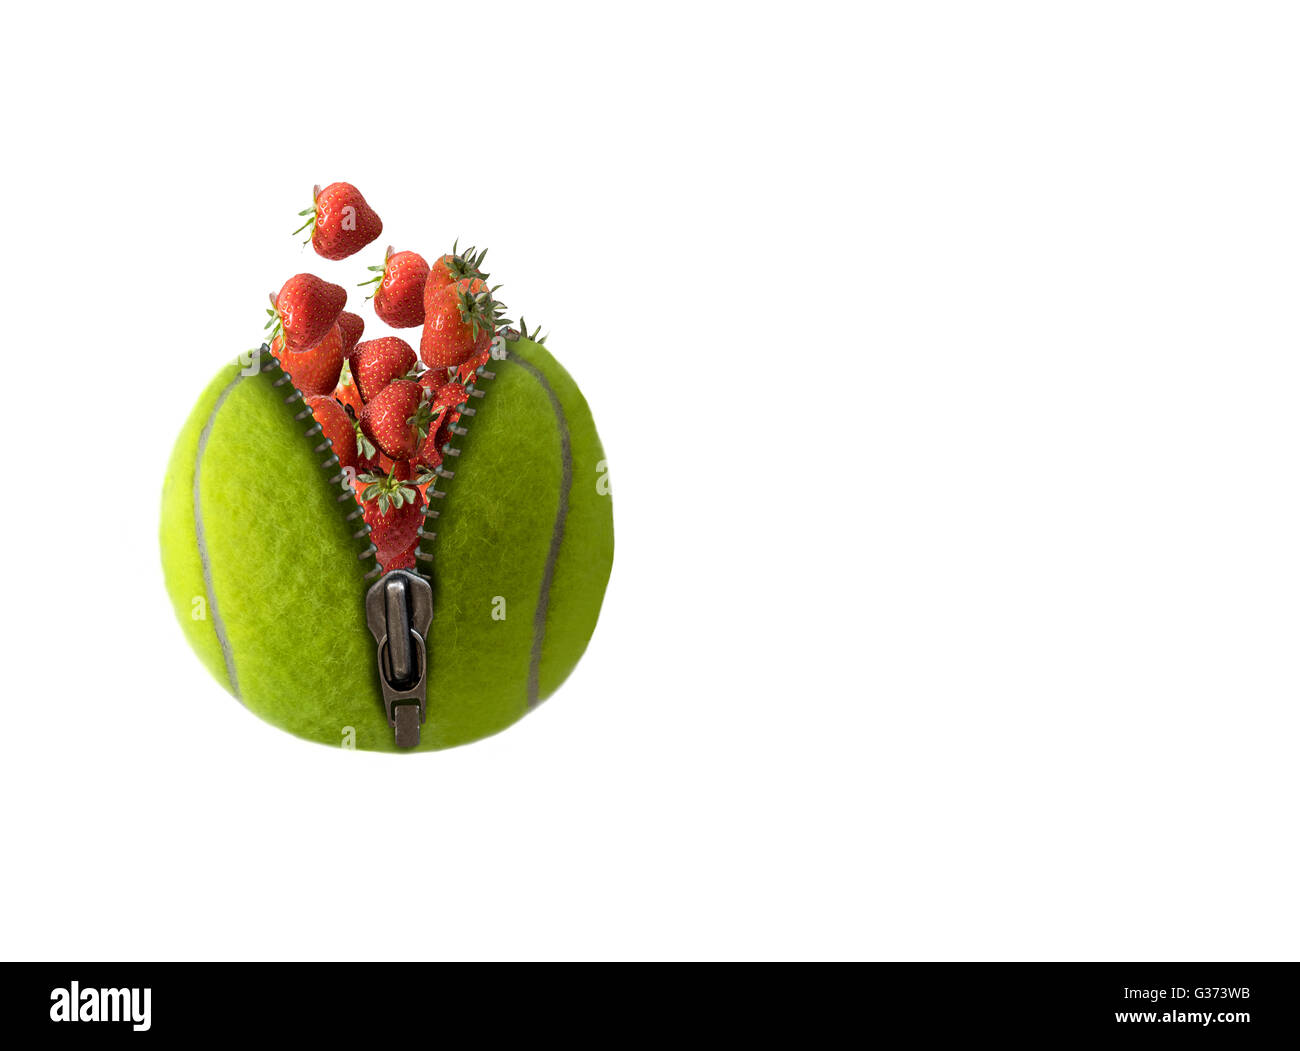 Tennis ball full of strawberries, 'unzipped ' to show the berries bursting out. On white background with copy space on the right Stock Photo